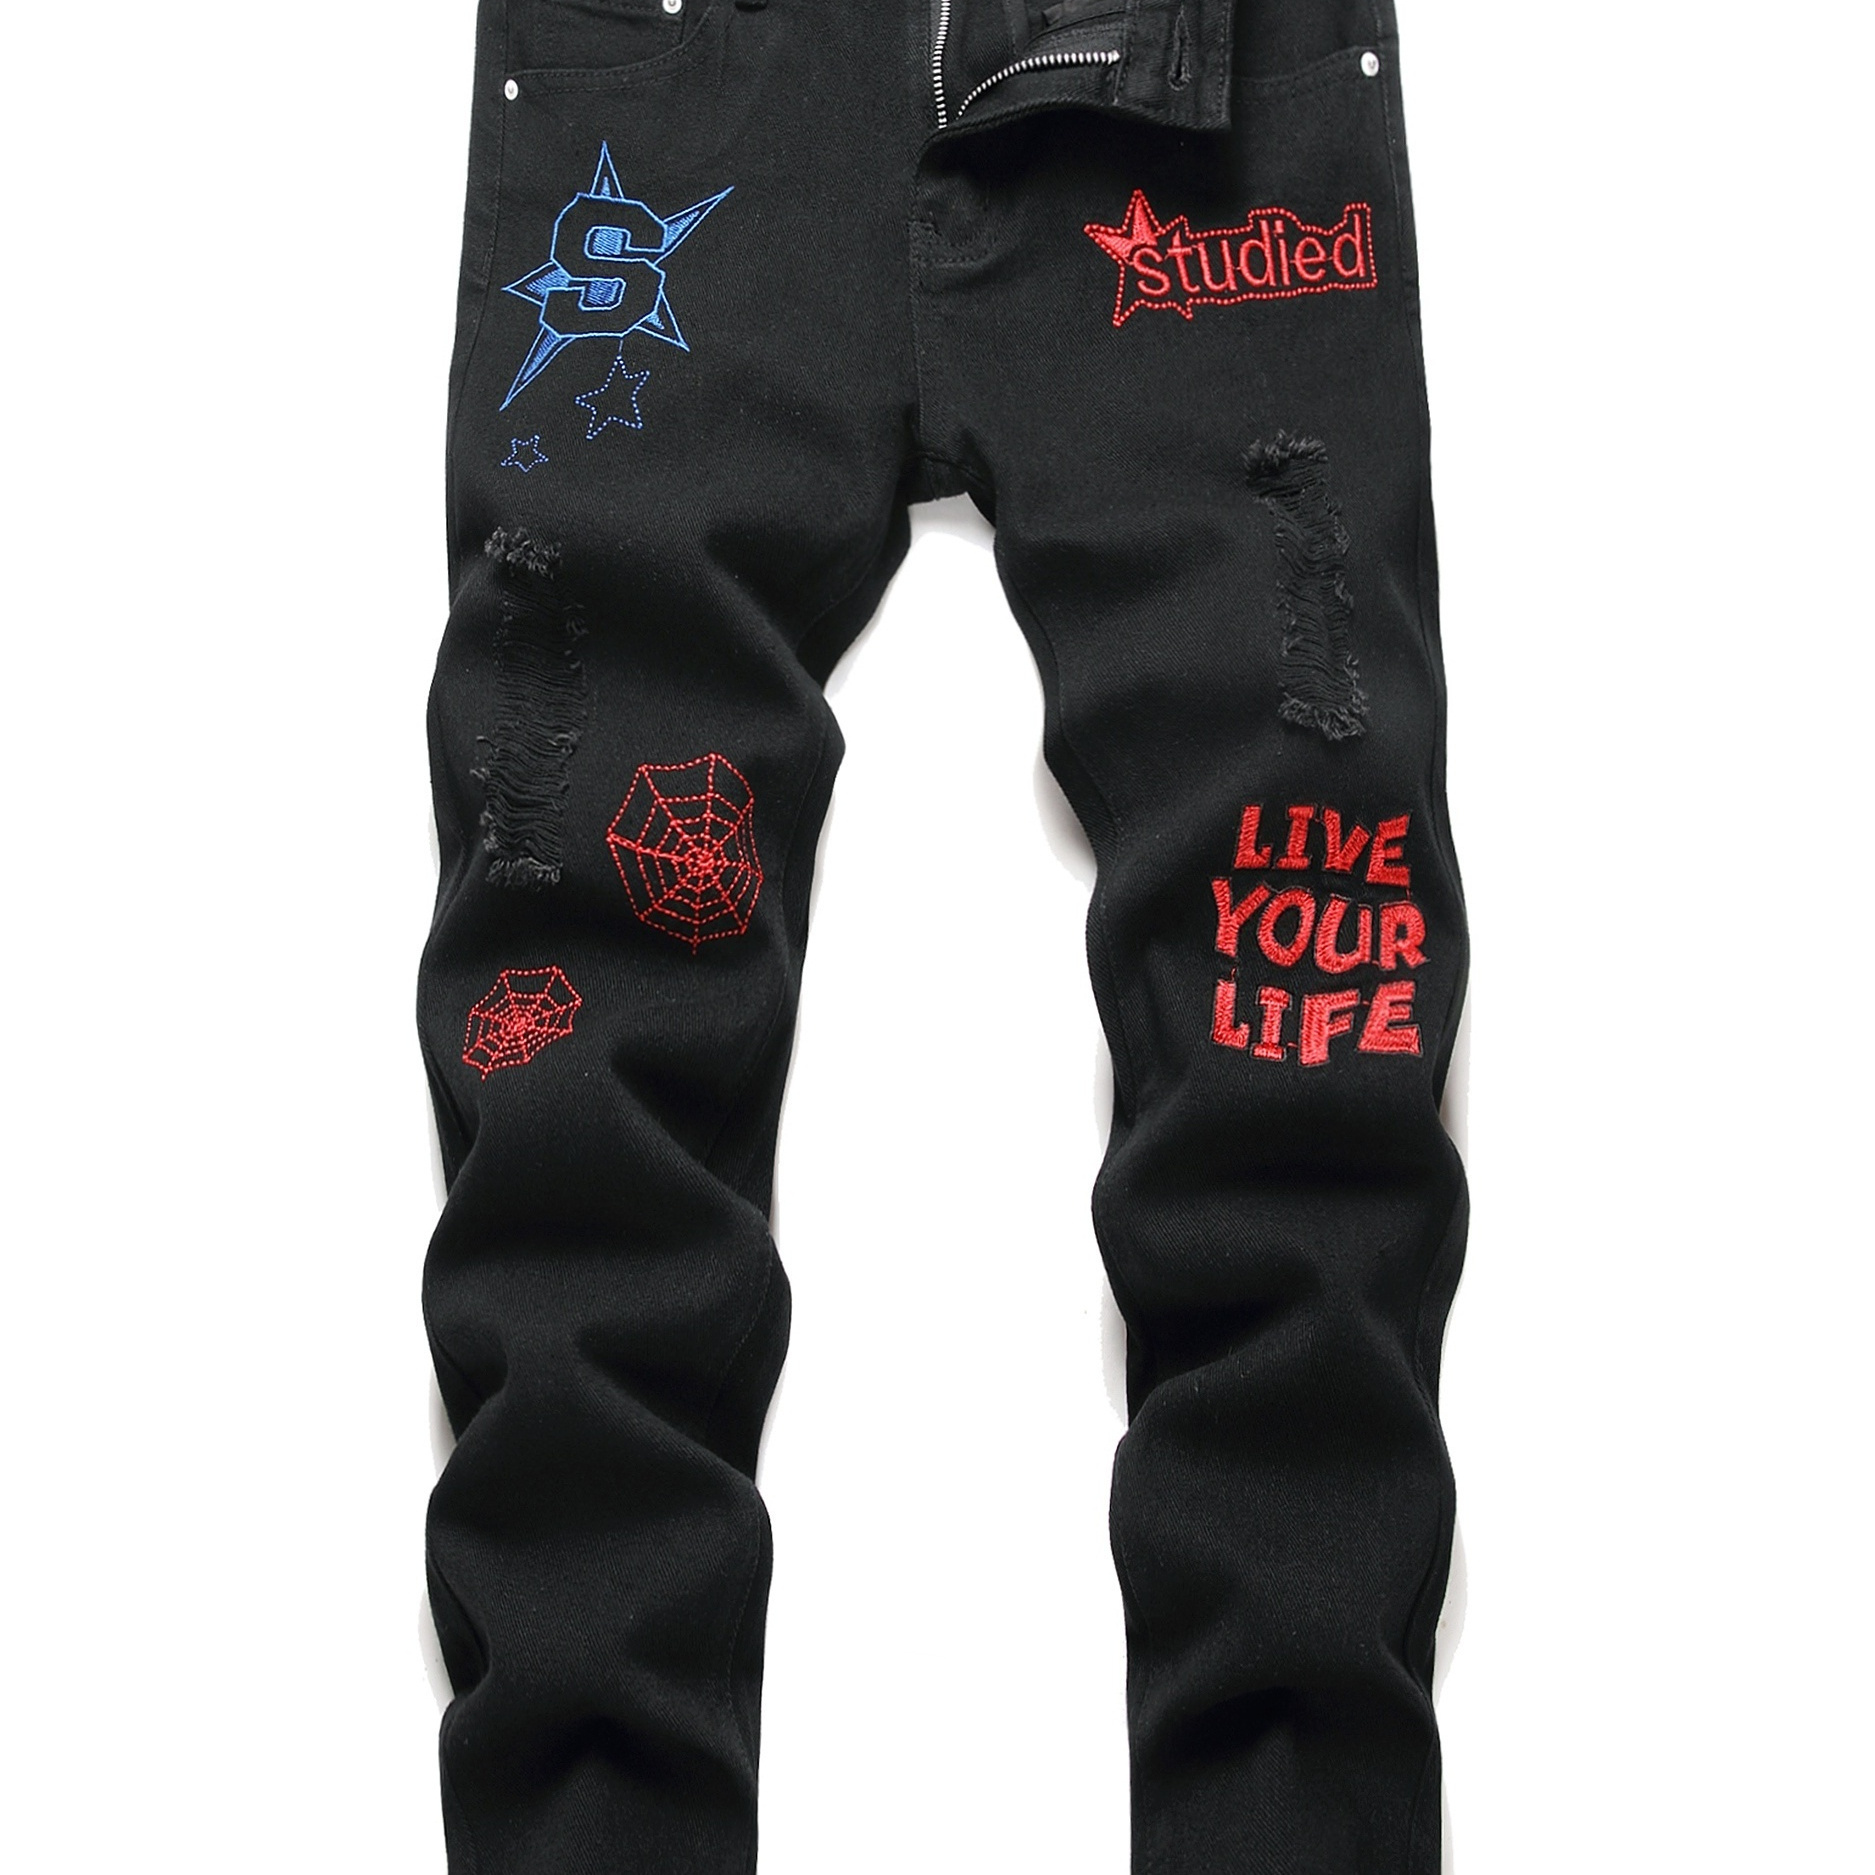 

Boys Graffiti Letter Embroidered Jeans Skinny Slim Fit Washed Denim Long Pants, Kids Clothing Outdoor